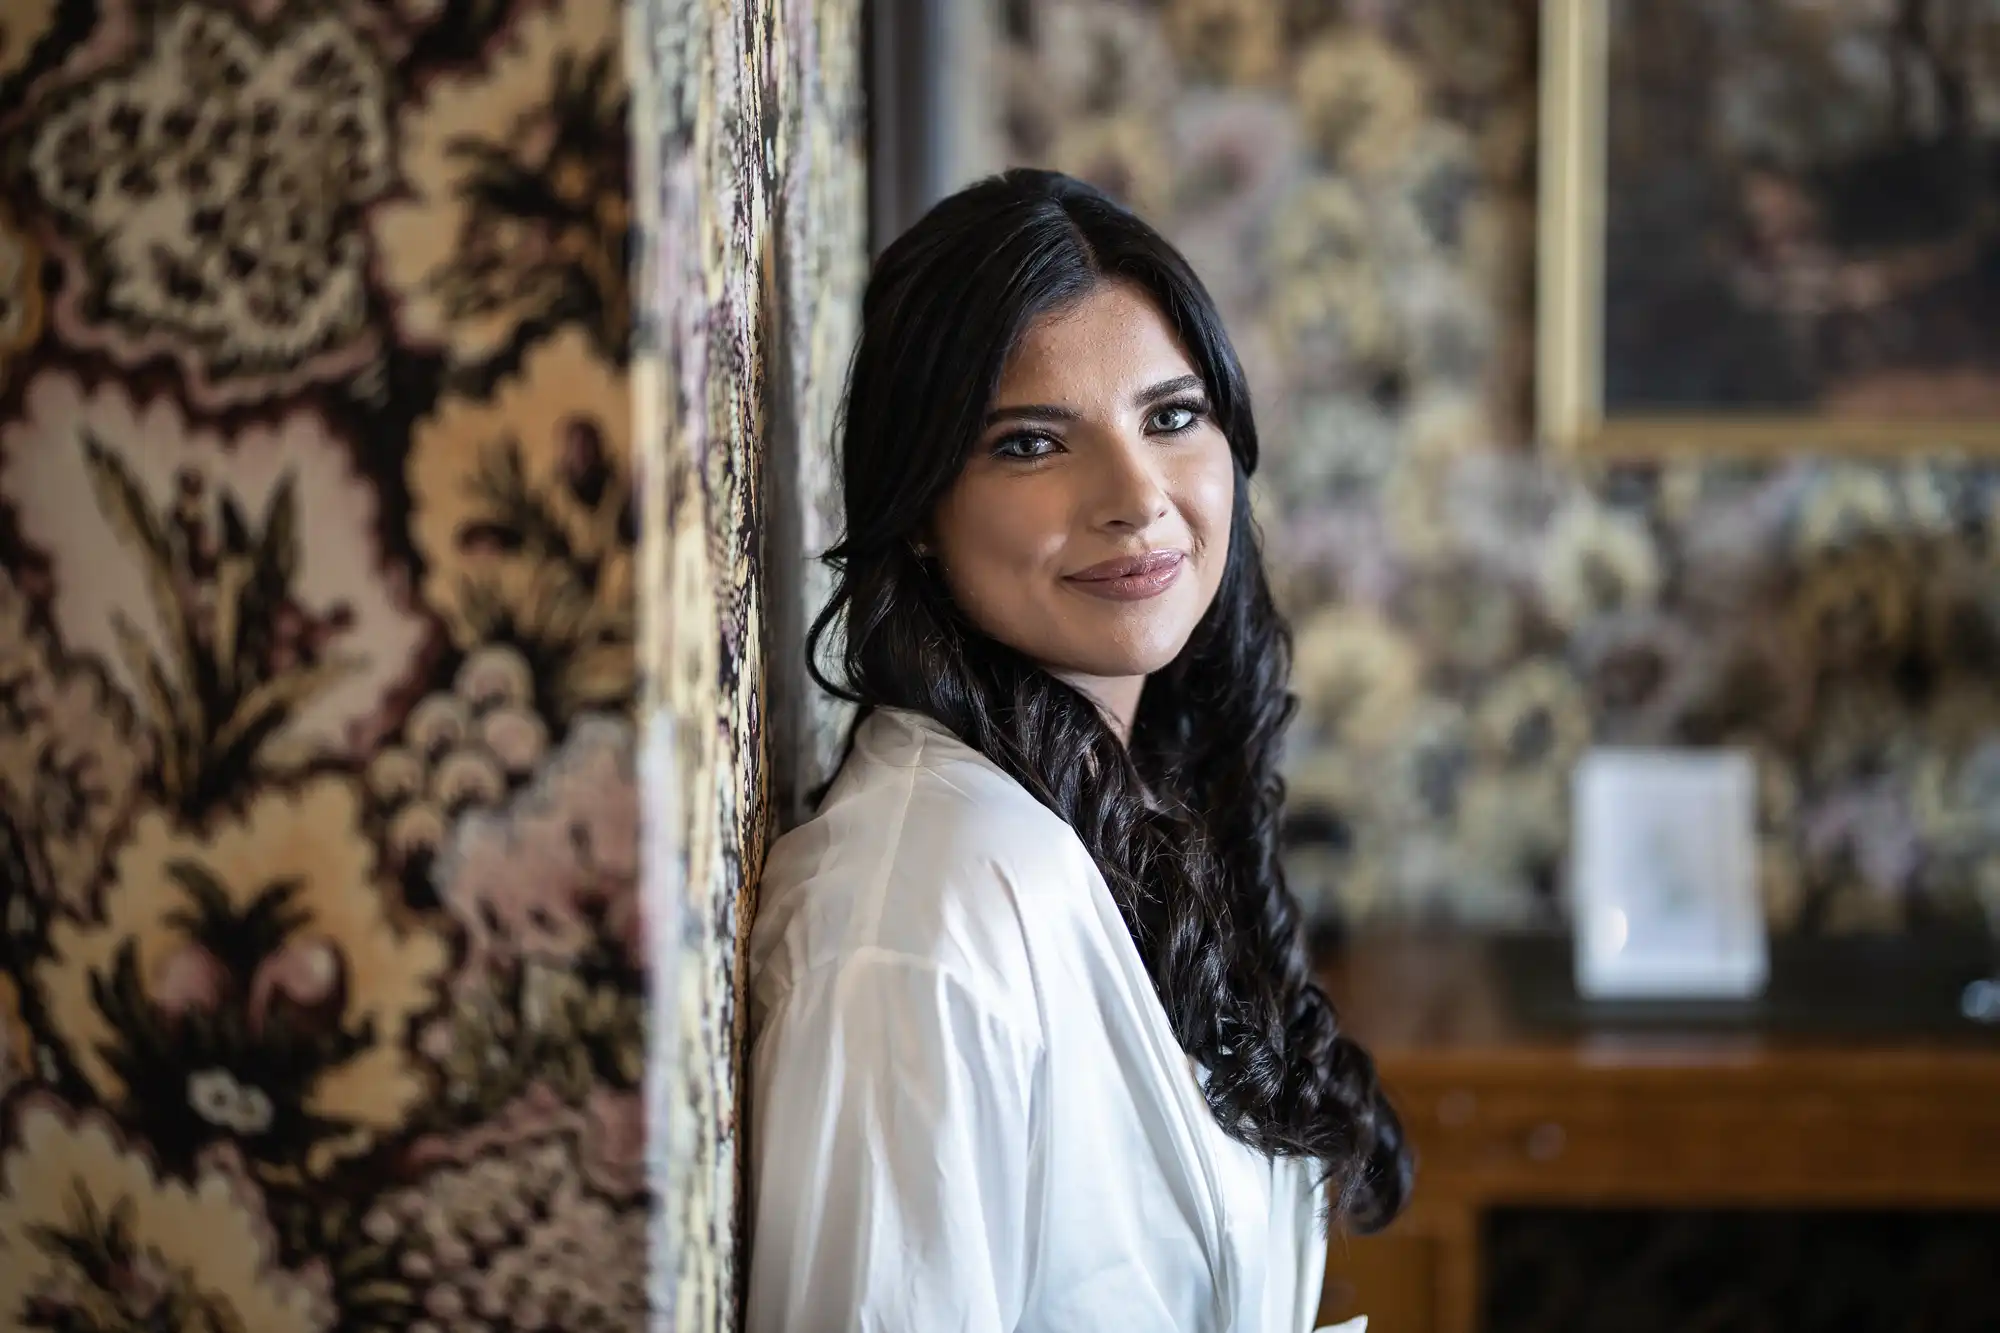 A woman with dark hair and a white blouse smiles gently, leaning against a wall with ornate tapestry in an elegantly decorated room.